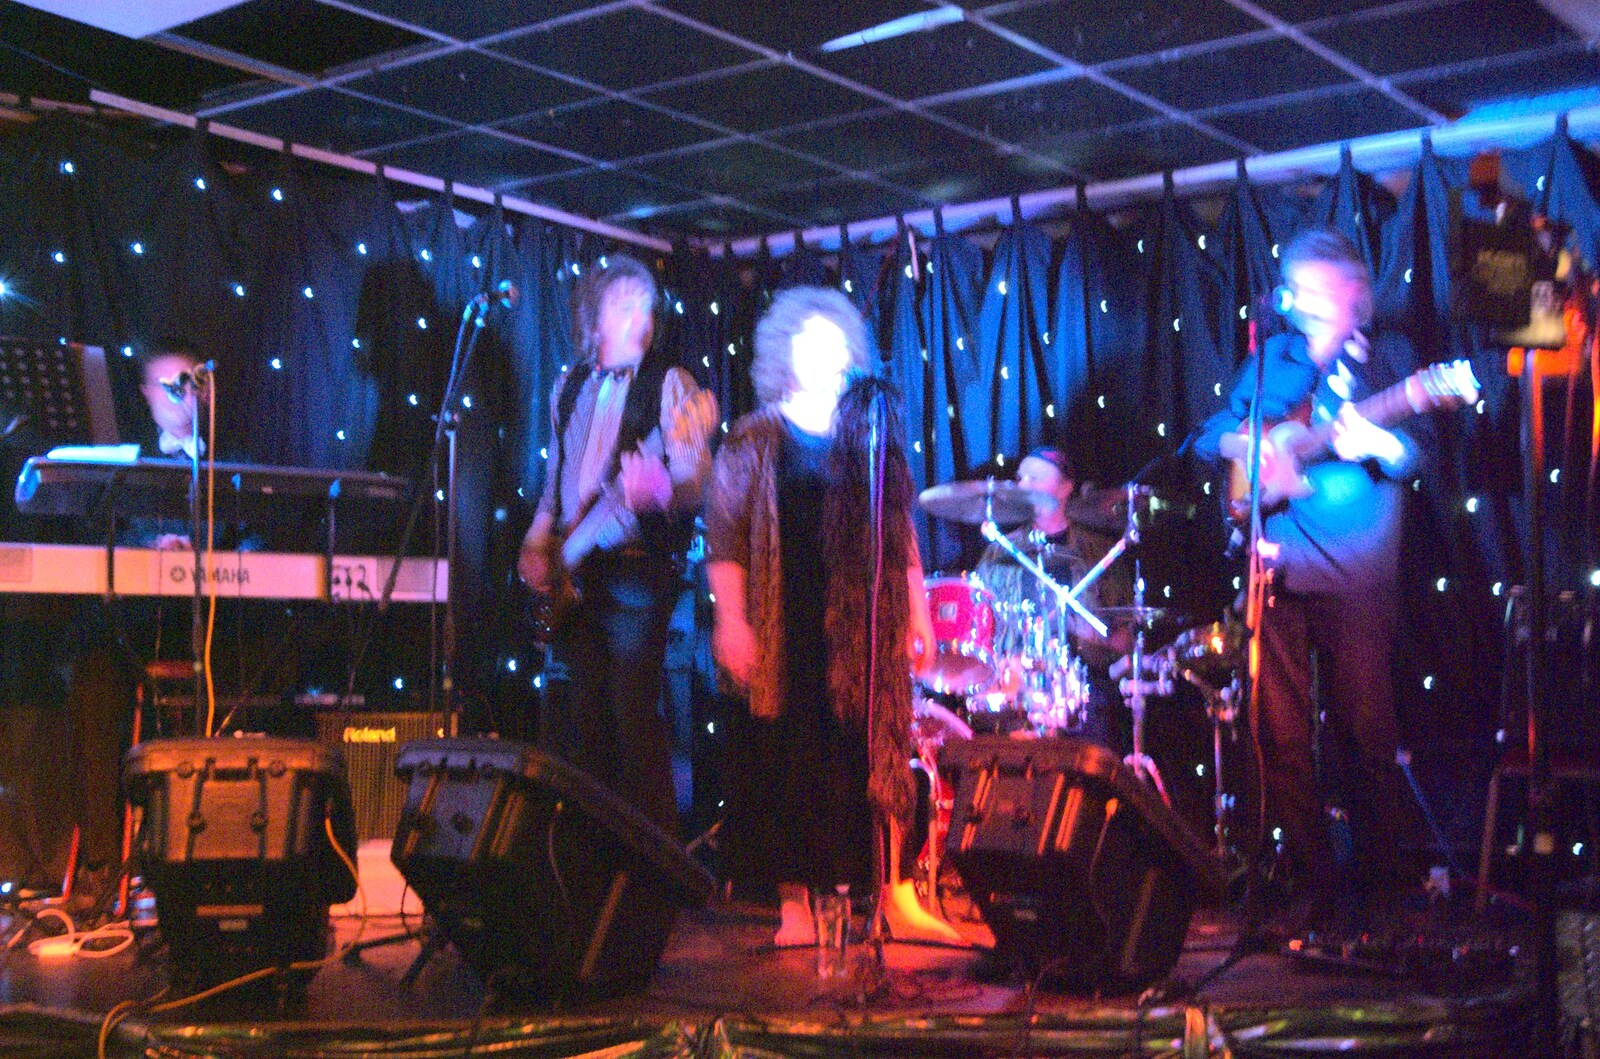 A blurry photo of The BBs in action from New Year's Eve With The BBs, Park Hotel, Diss, Norfolk - 31st December 2010